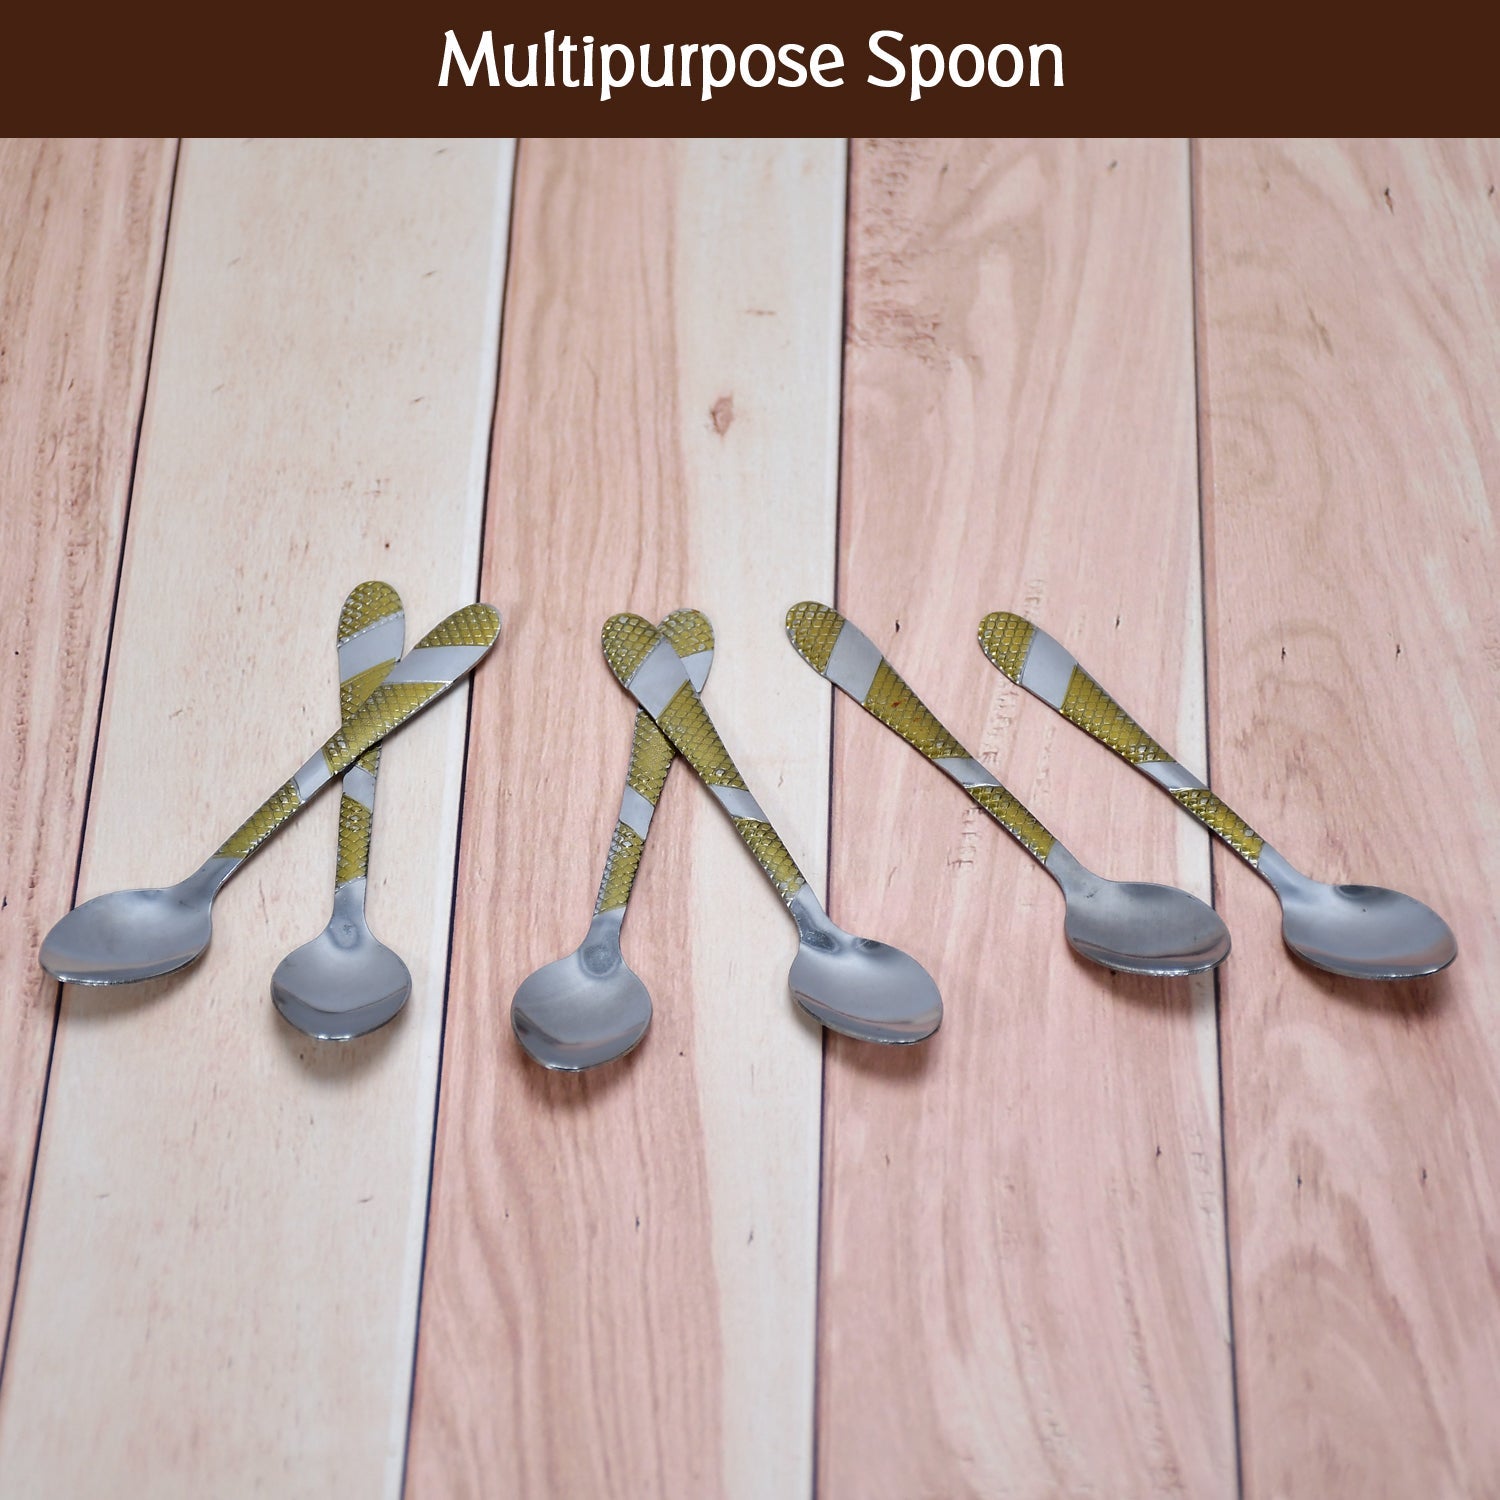 2360 Stainless Steel Spoons Set of 6pc Small Spoons. Tiny Spoons for Coffee, Tea, Sugar, & Spices. 